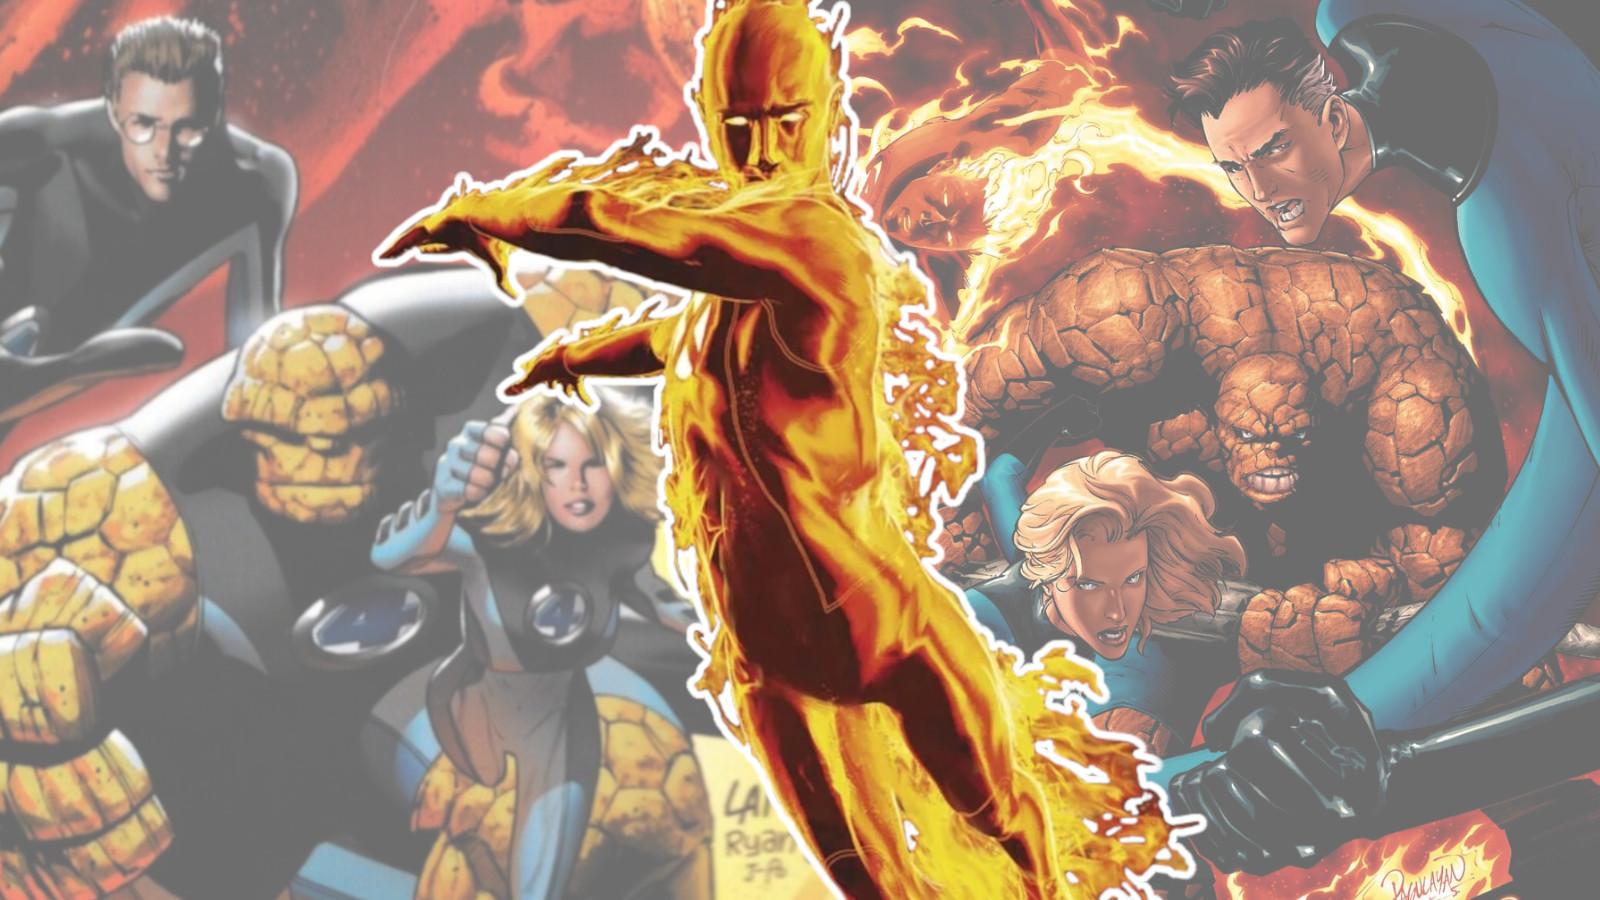 The Fantastic Four in Ultimate and 616 universes